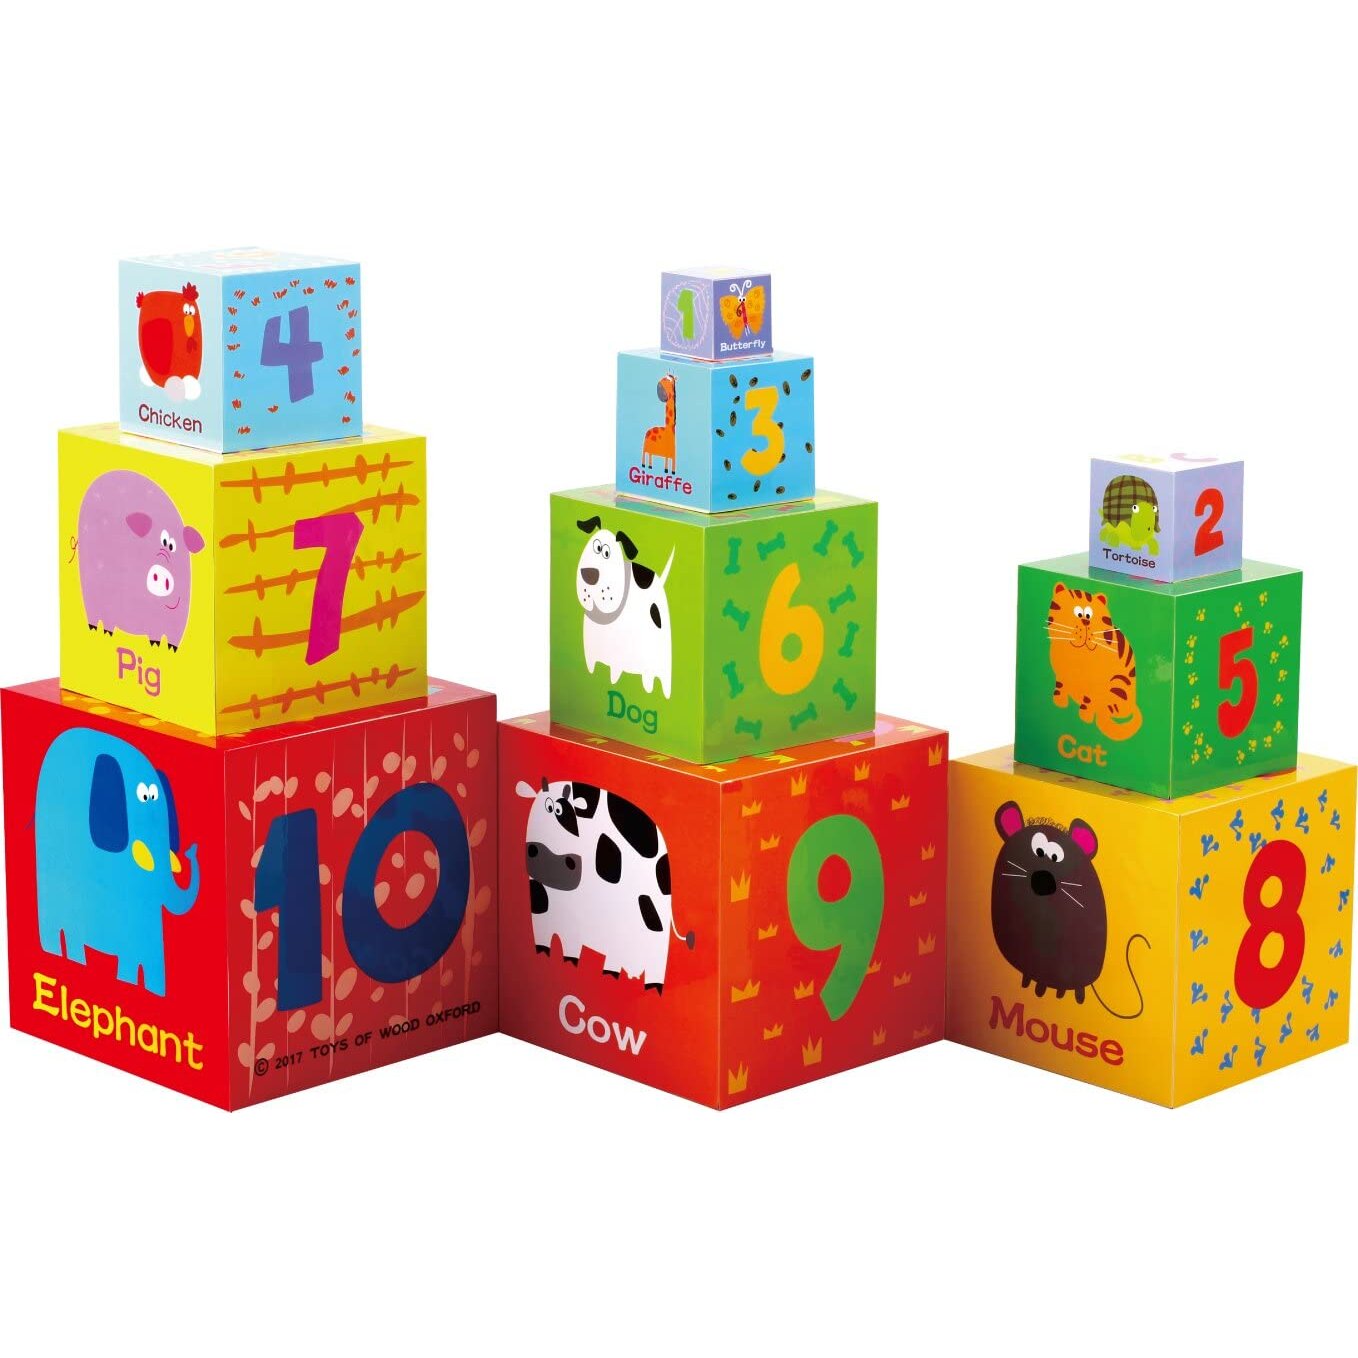 TOWO Wooden Stacking Boxes-Nesting and Sorting Cups Numbers Alphabet Animals Blocks for Toddlers-Stacking Cubes Educational Toys for 2 years